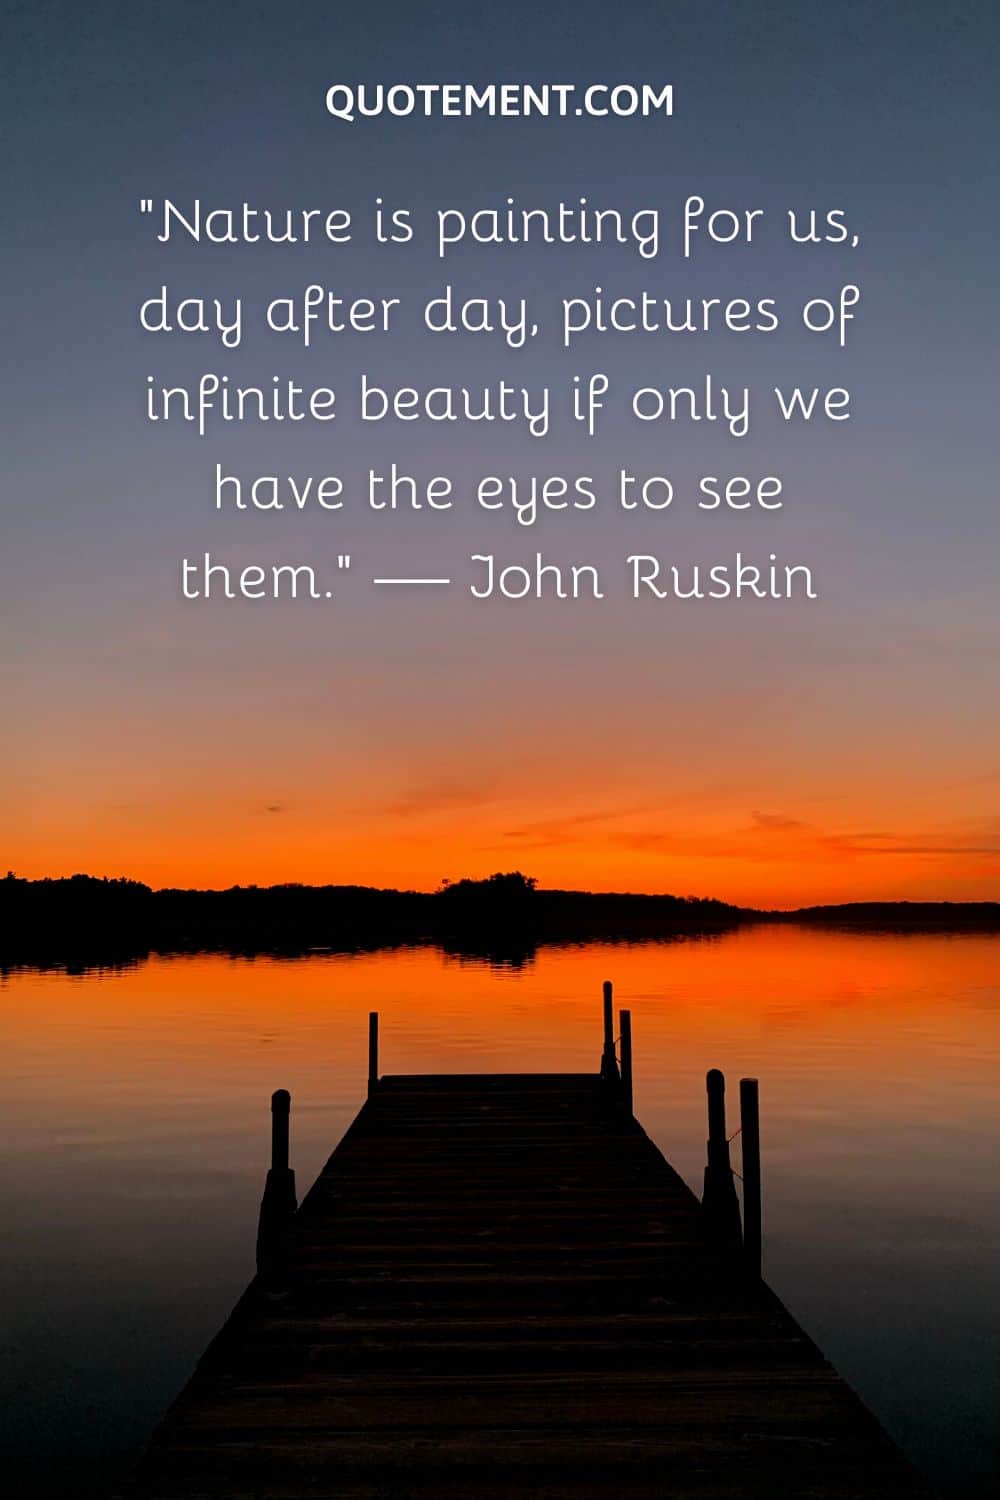 “Nature is painting for us, day after day, pictures of infinite beauty if only we have the eyes to see them.” — John Ruskin